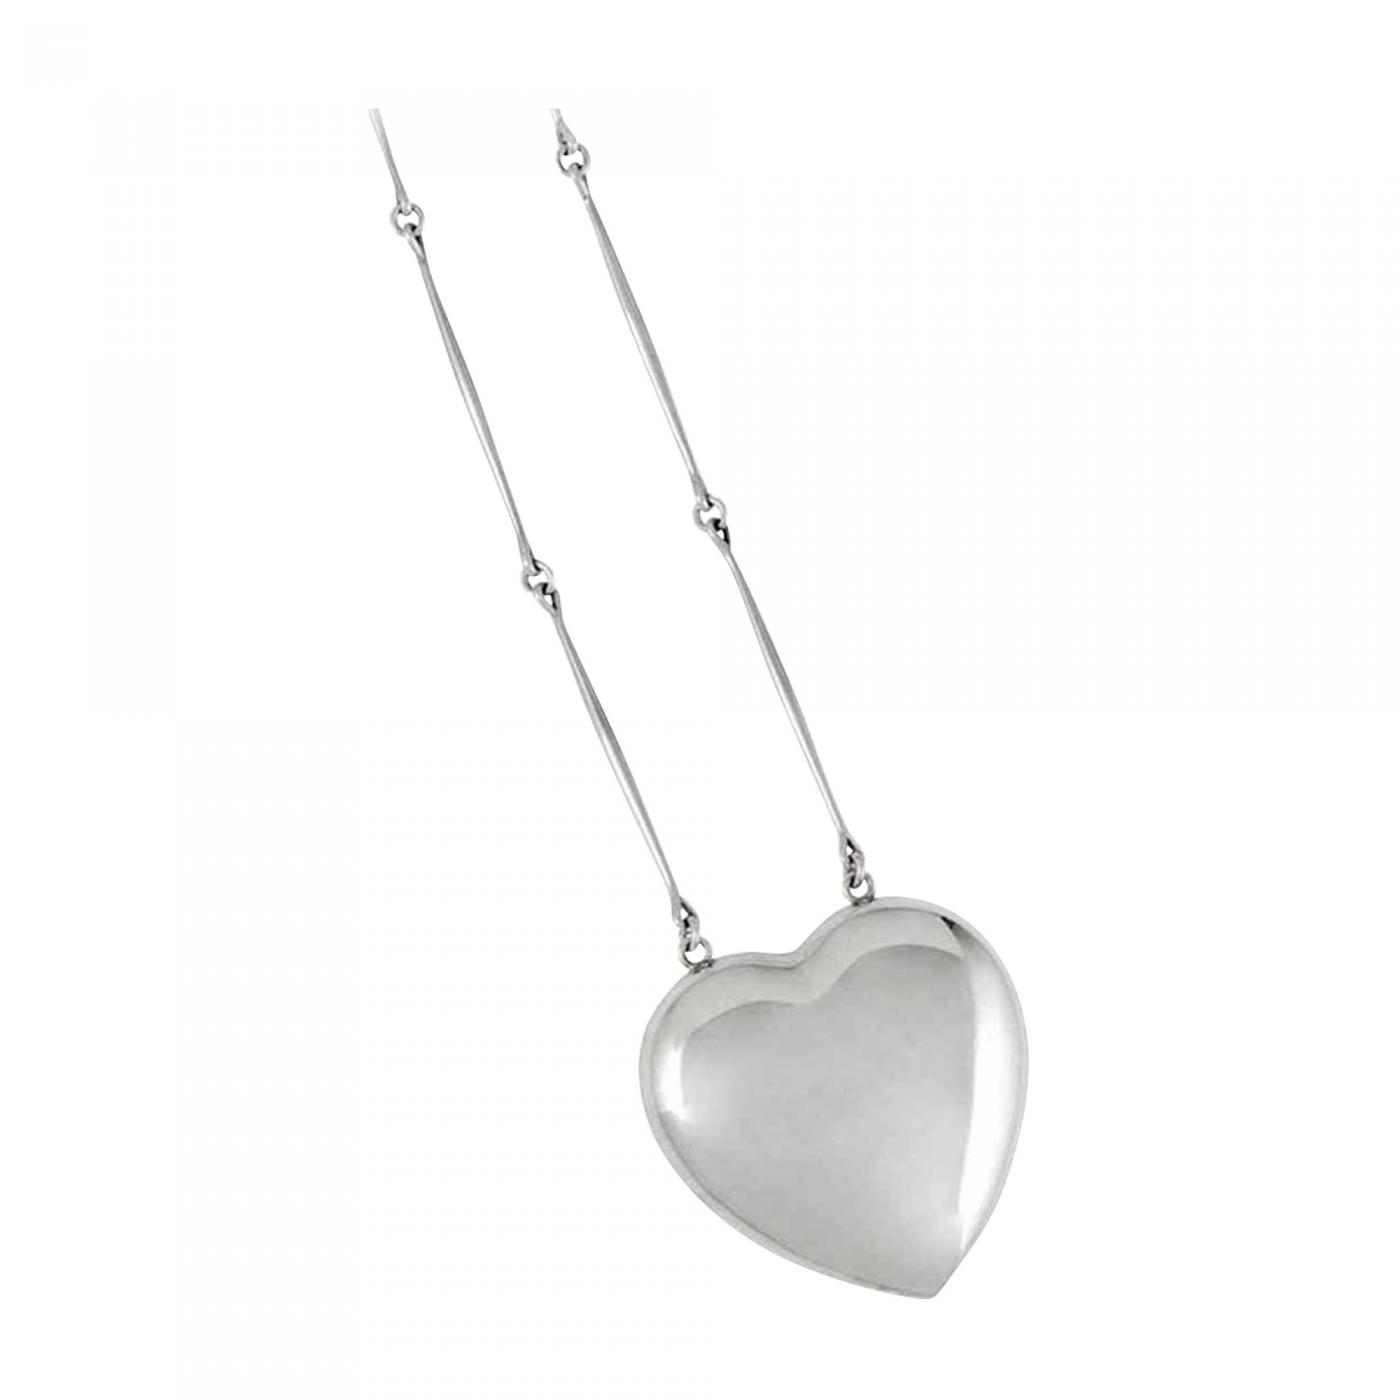 HEARTS OF GEORG JENSEN pendant and chain in sterling silver